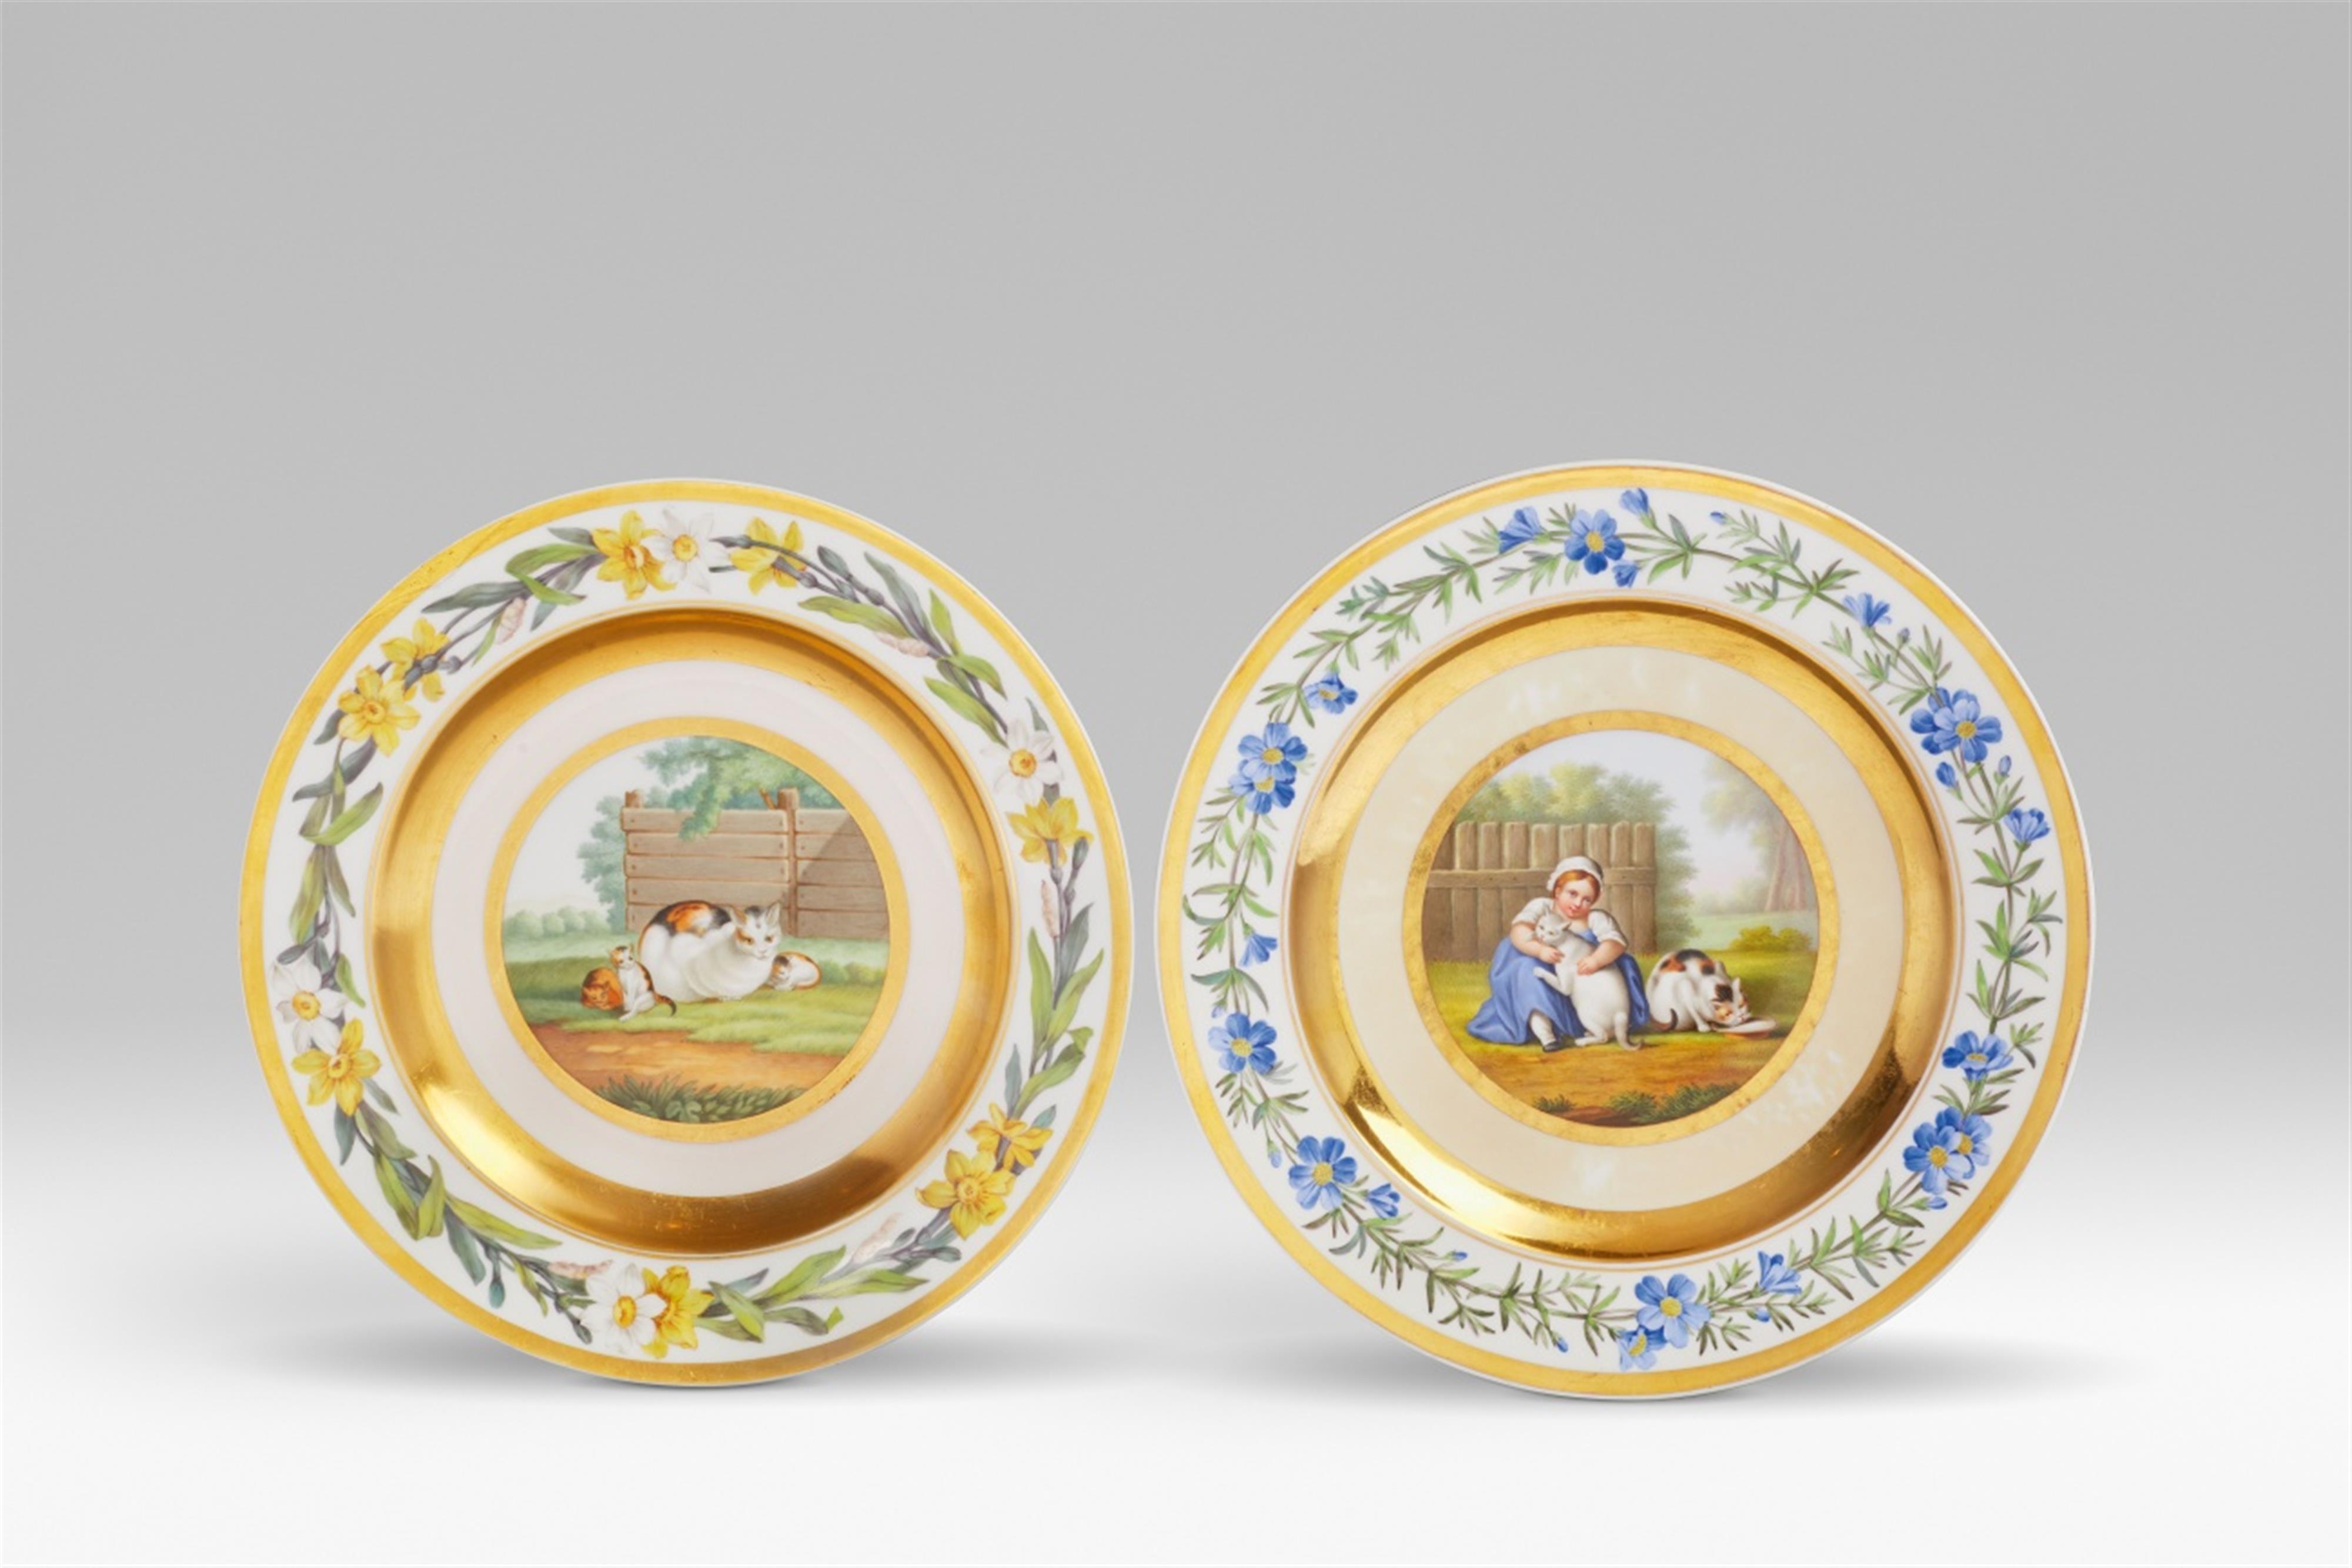 Two Berlin KPM porcelain plates made for Prince Carl of Prussia - image-1